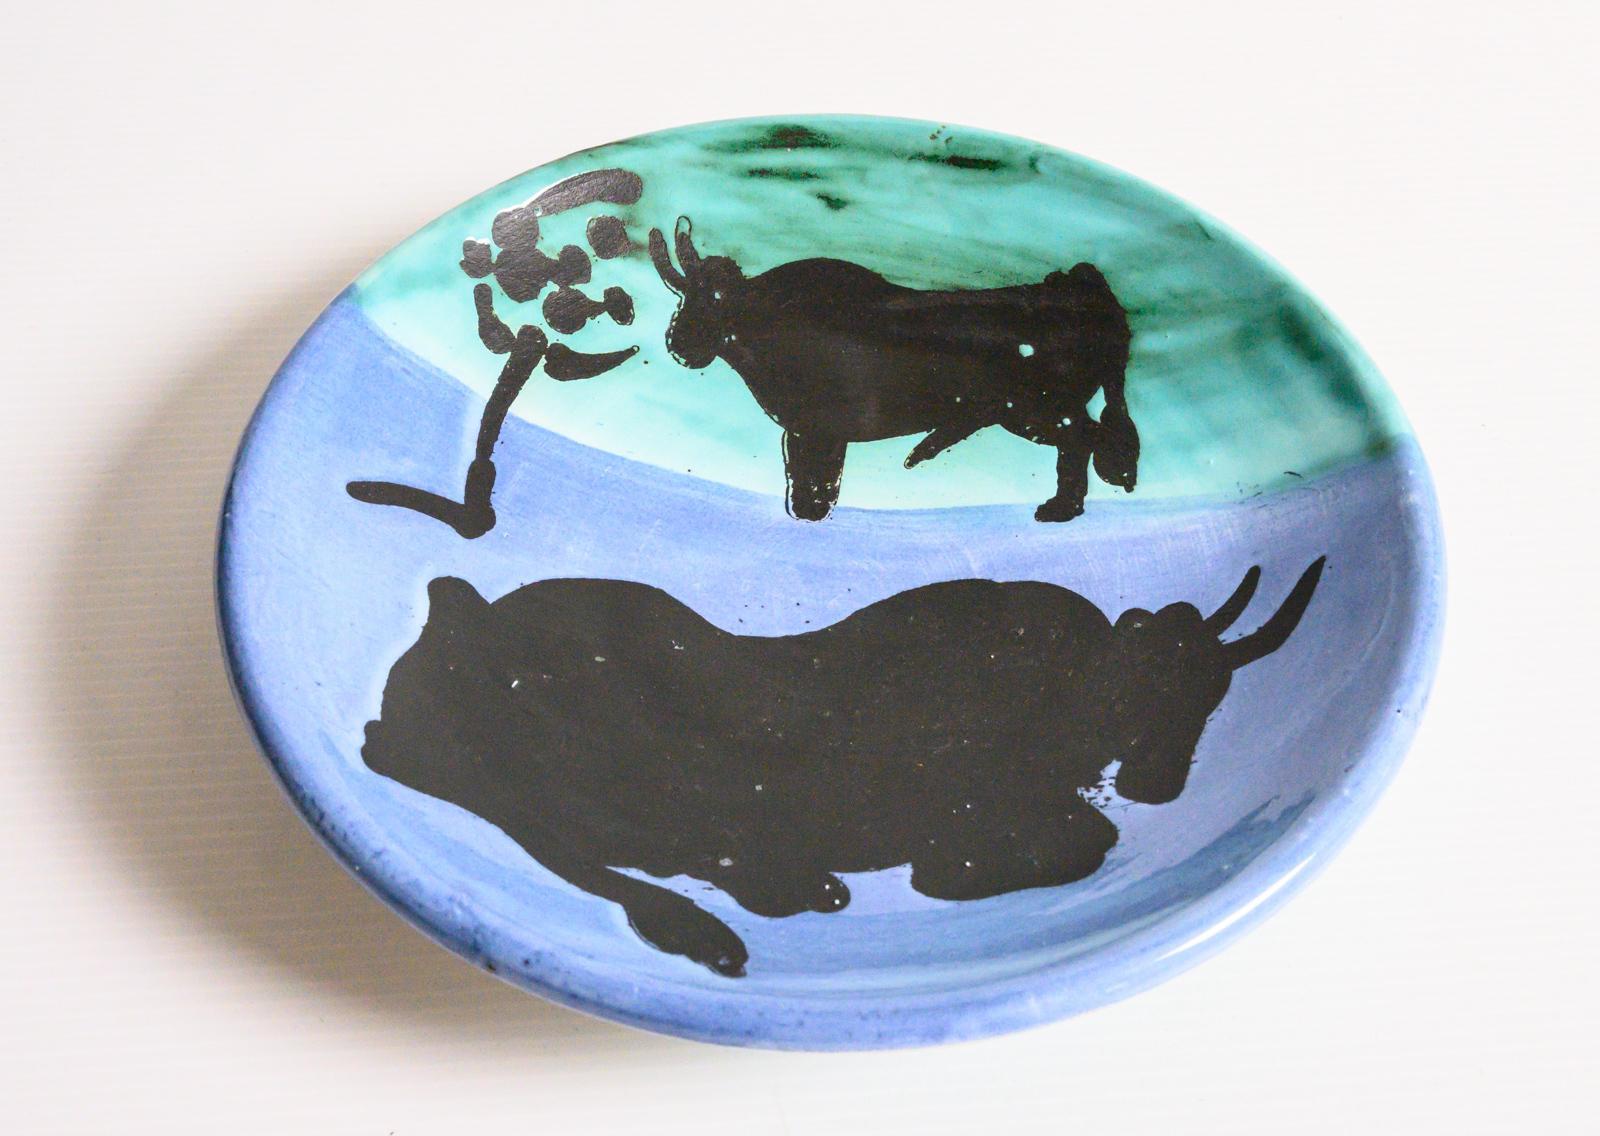 Glazed ceramic plate by Pablo Picasso. White earthenware clay, decorated in underglaze blue, green and black. Marked and stamped “Madoura Plein feu” and “Edition Picasso” underneath, in a edition of 500 edition Picasso/Madoura. Alain Ramié N°161.